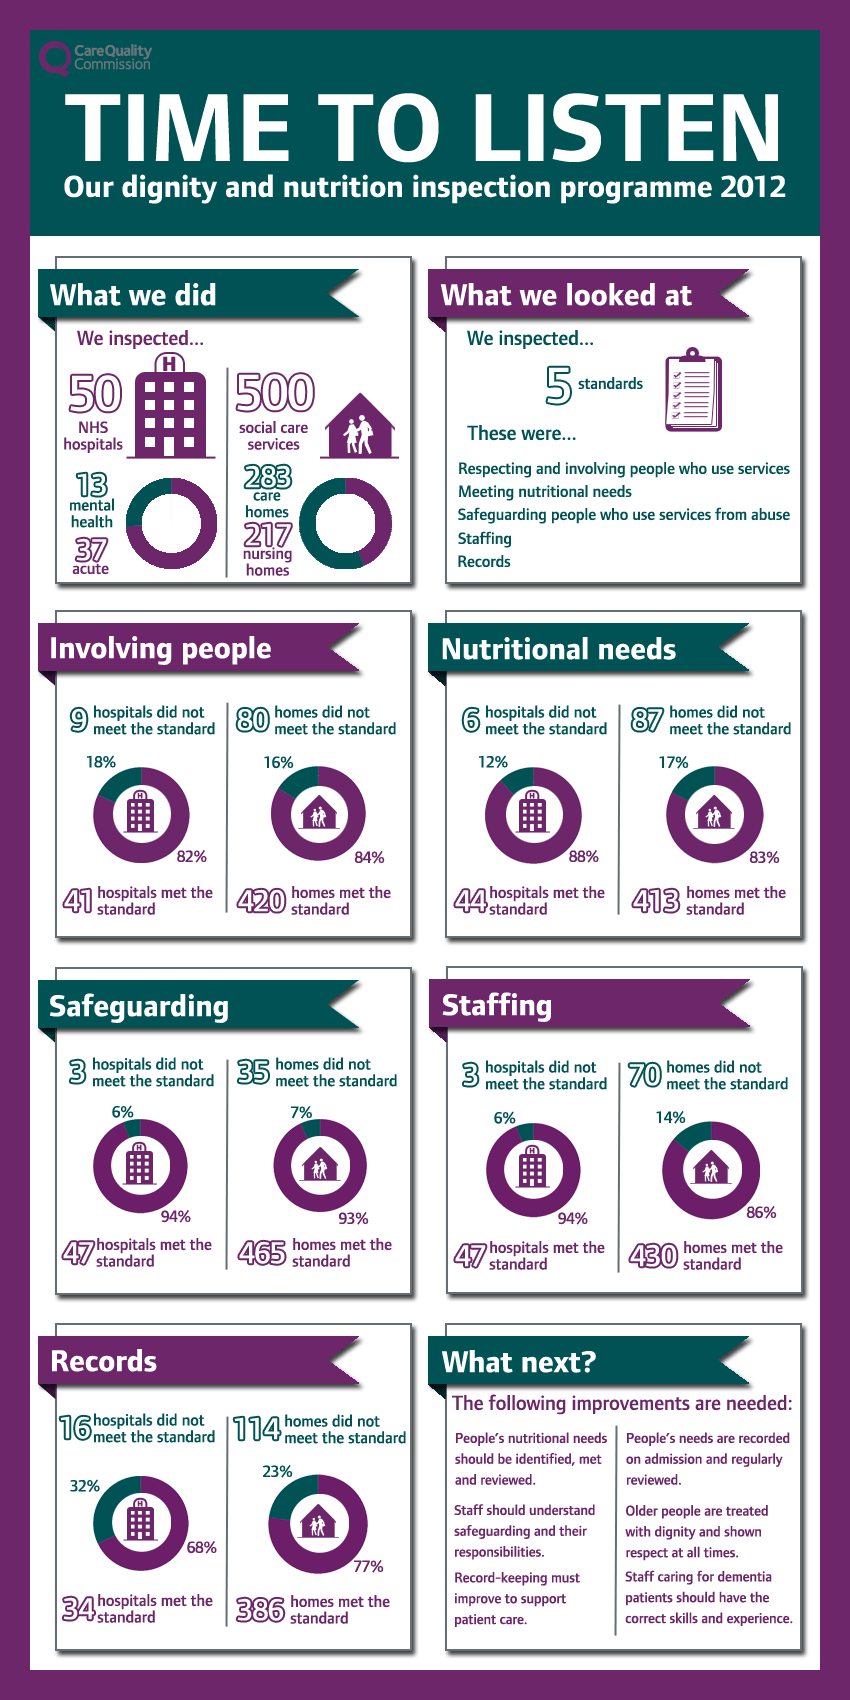 Our infographic shows the basic findings of the inspection programme